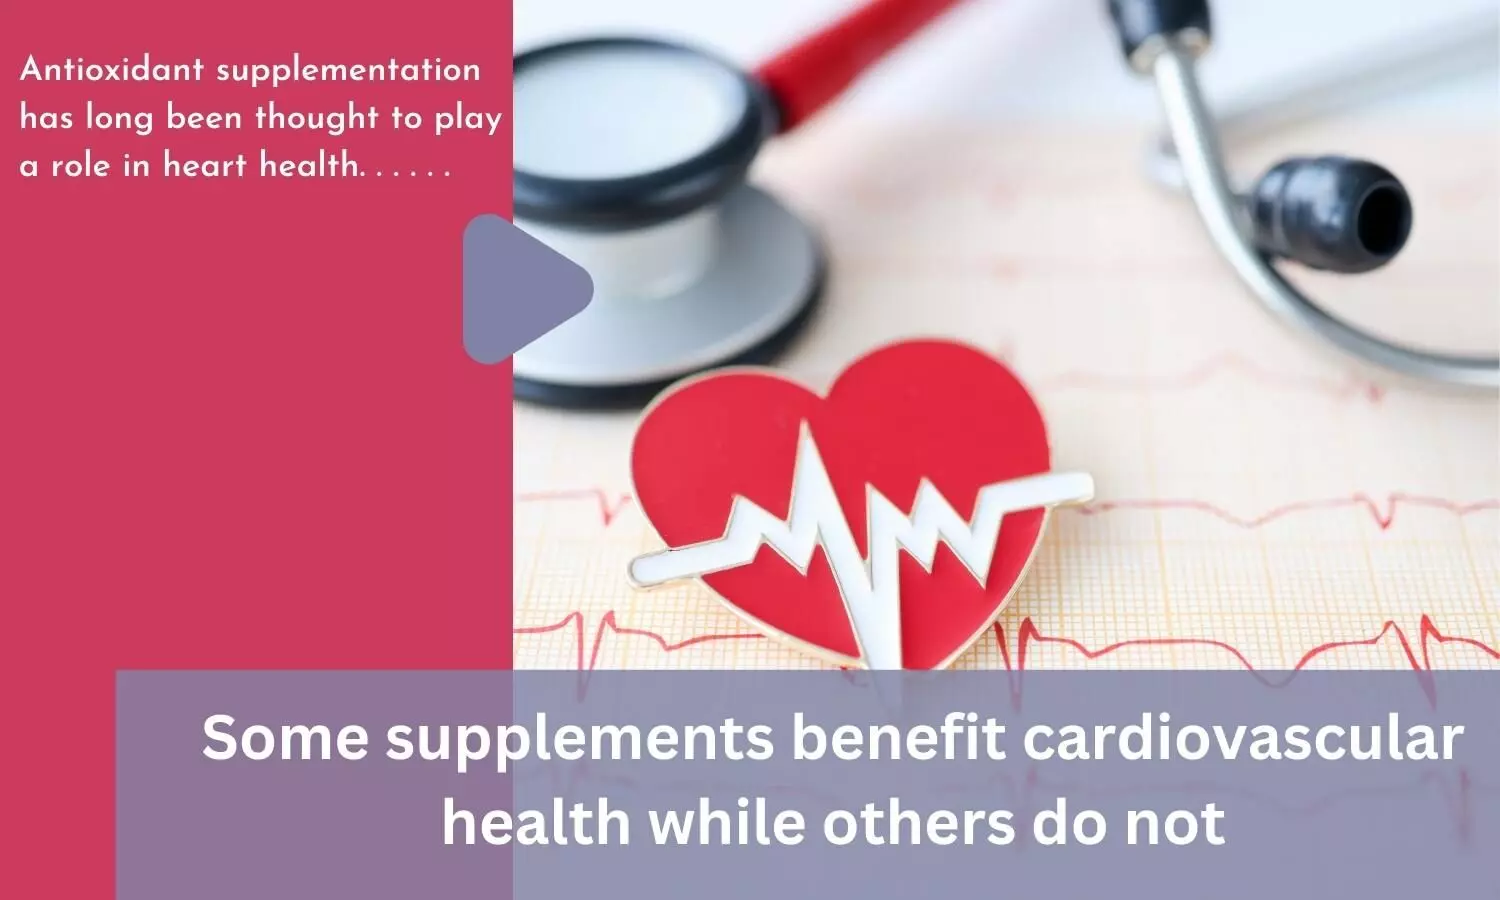 Some supplements benefit cardiovascular health while others do not: Study